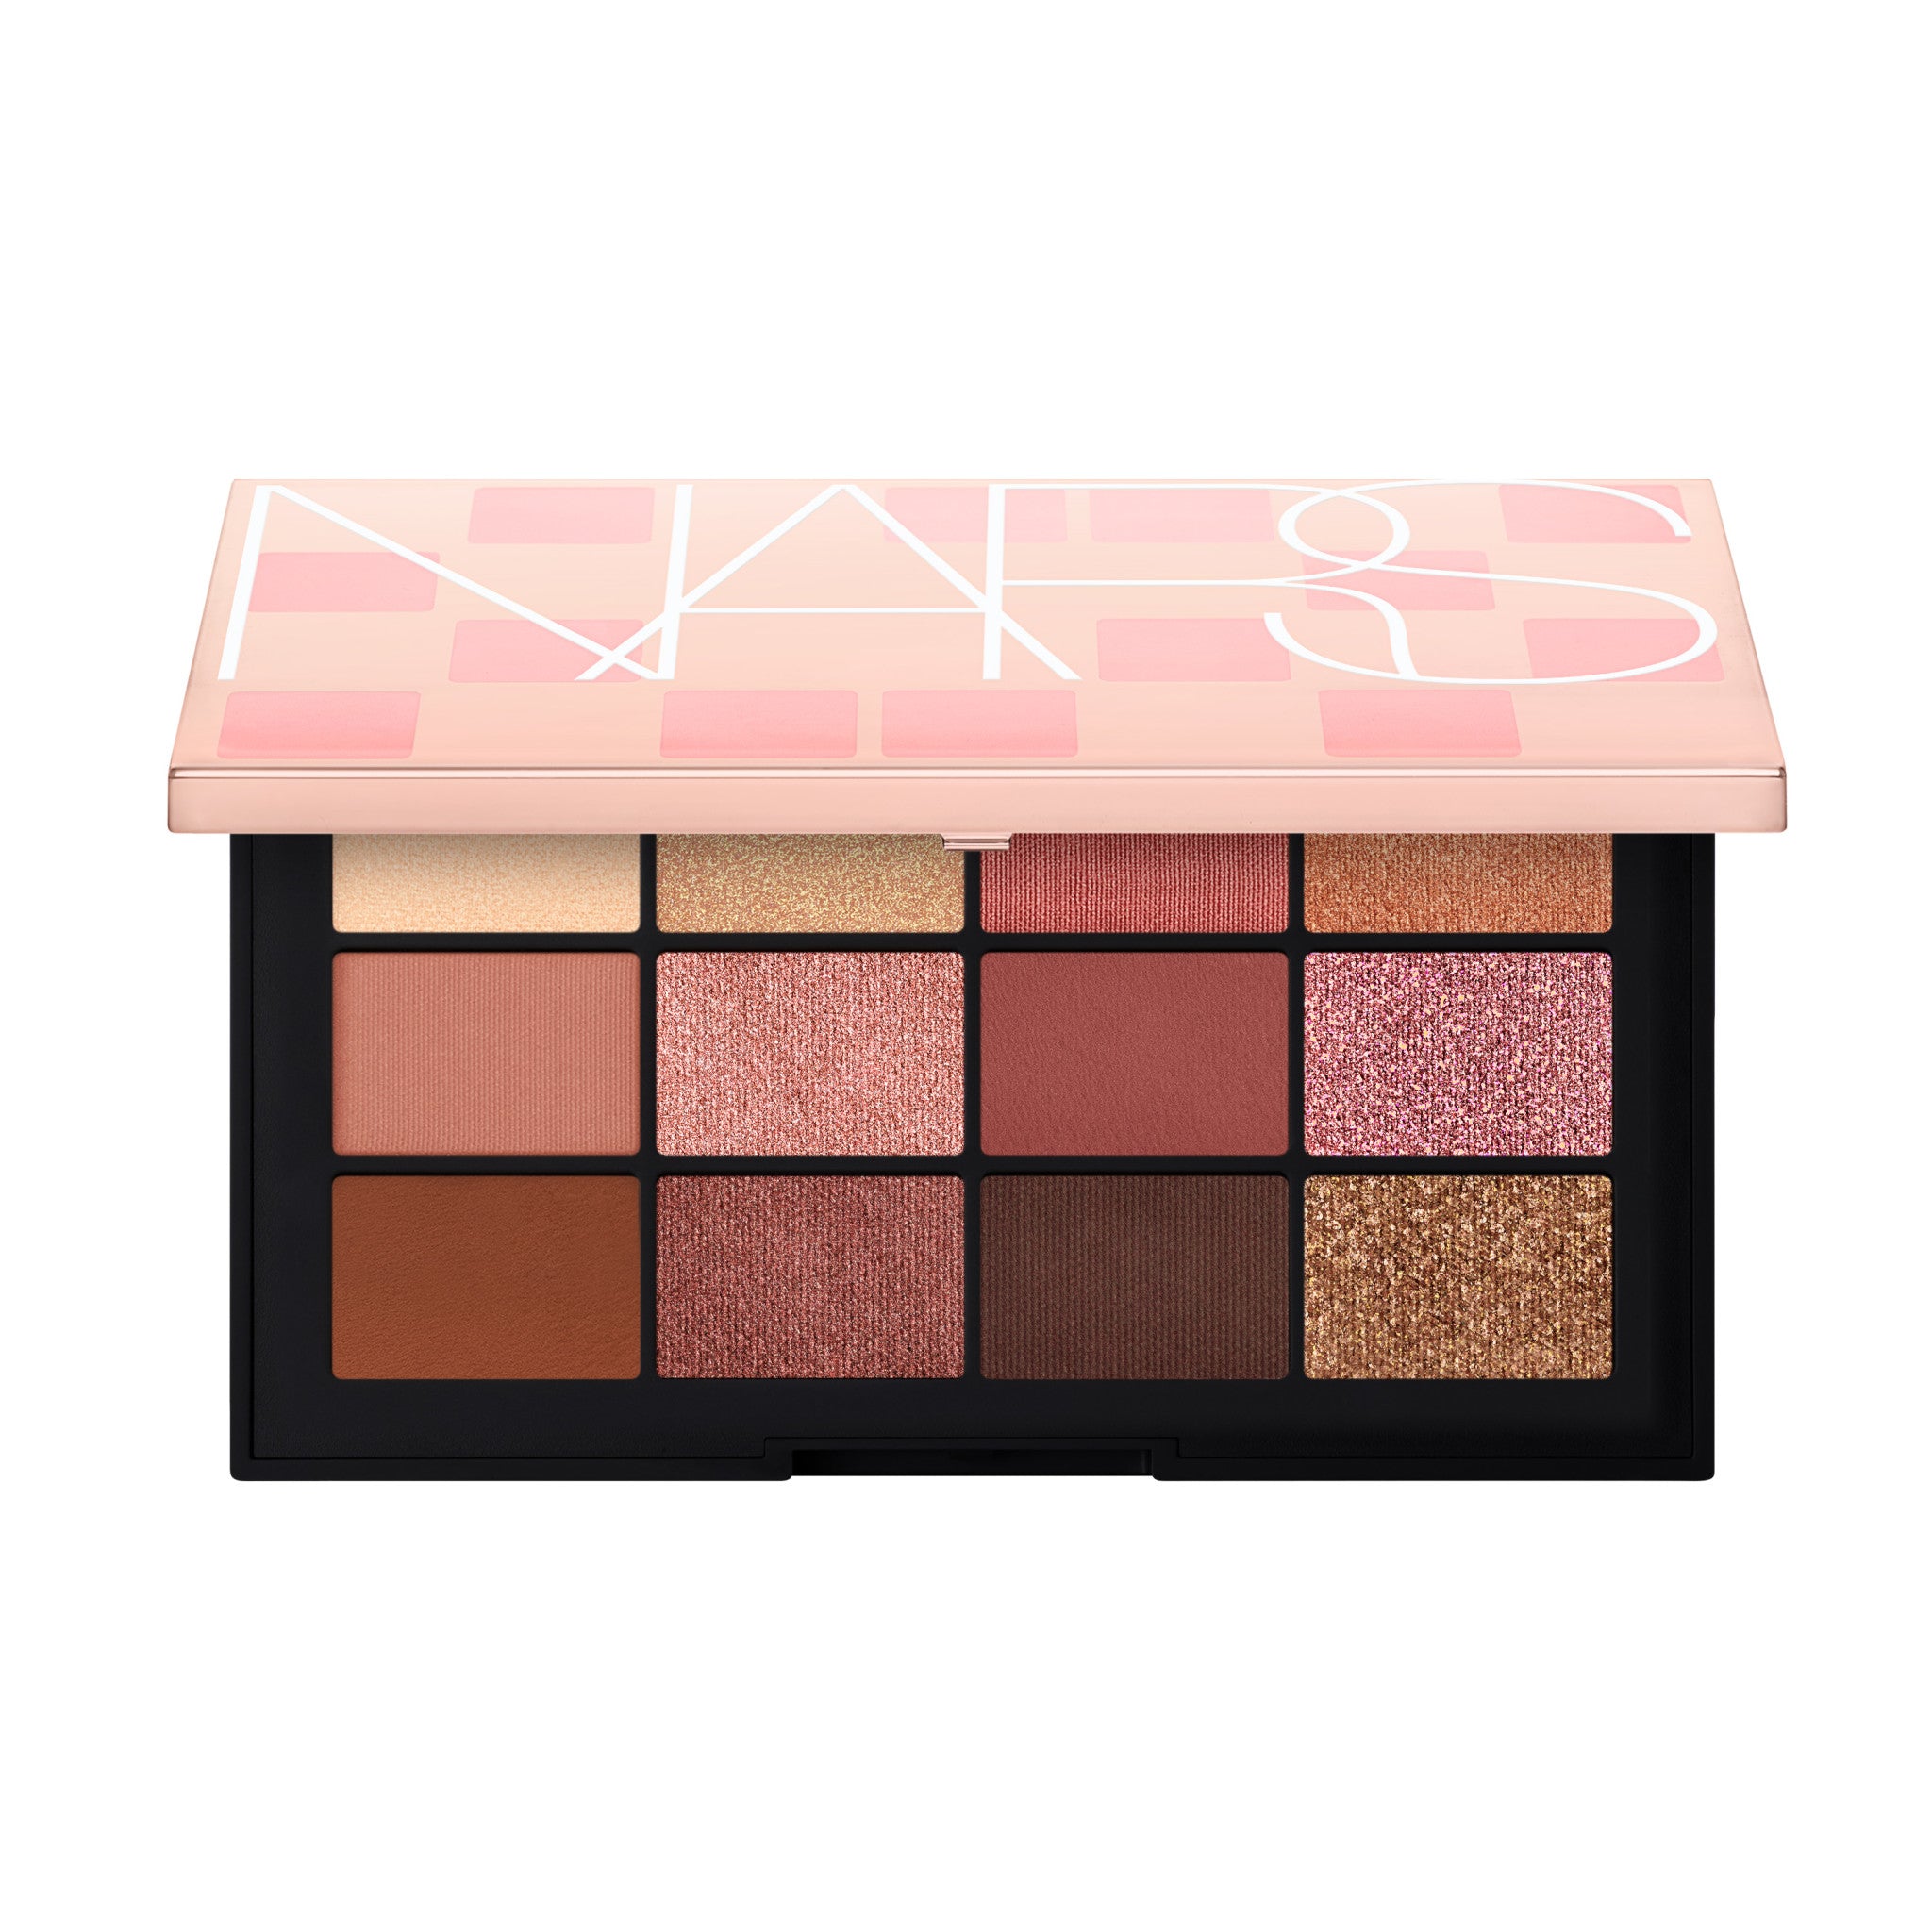 Nars Afterglow Irresistible Eyeshadow Palette (Limited Edition) main image.